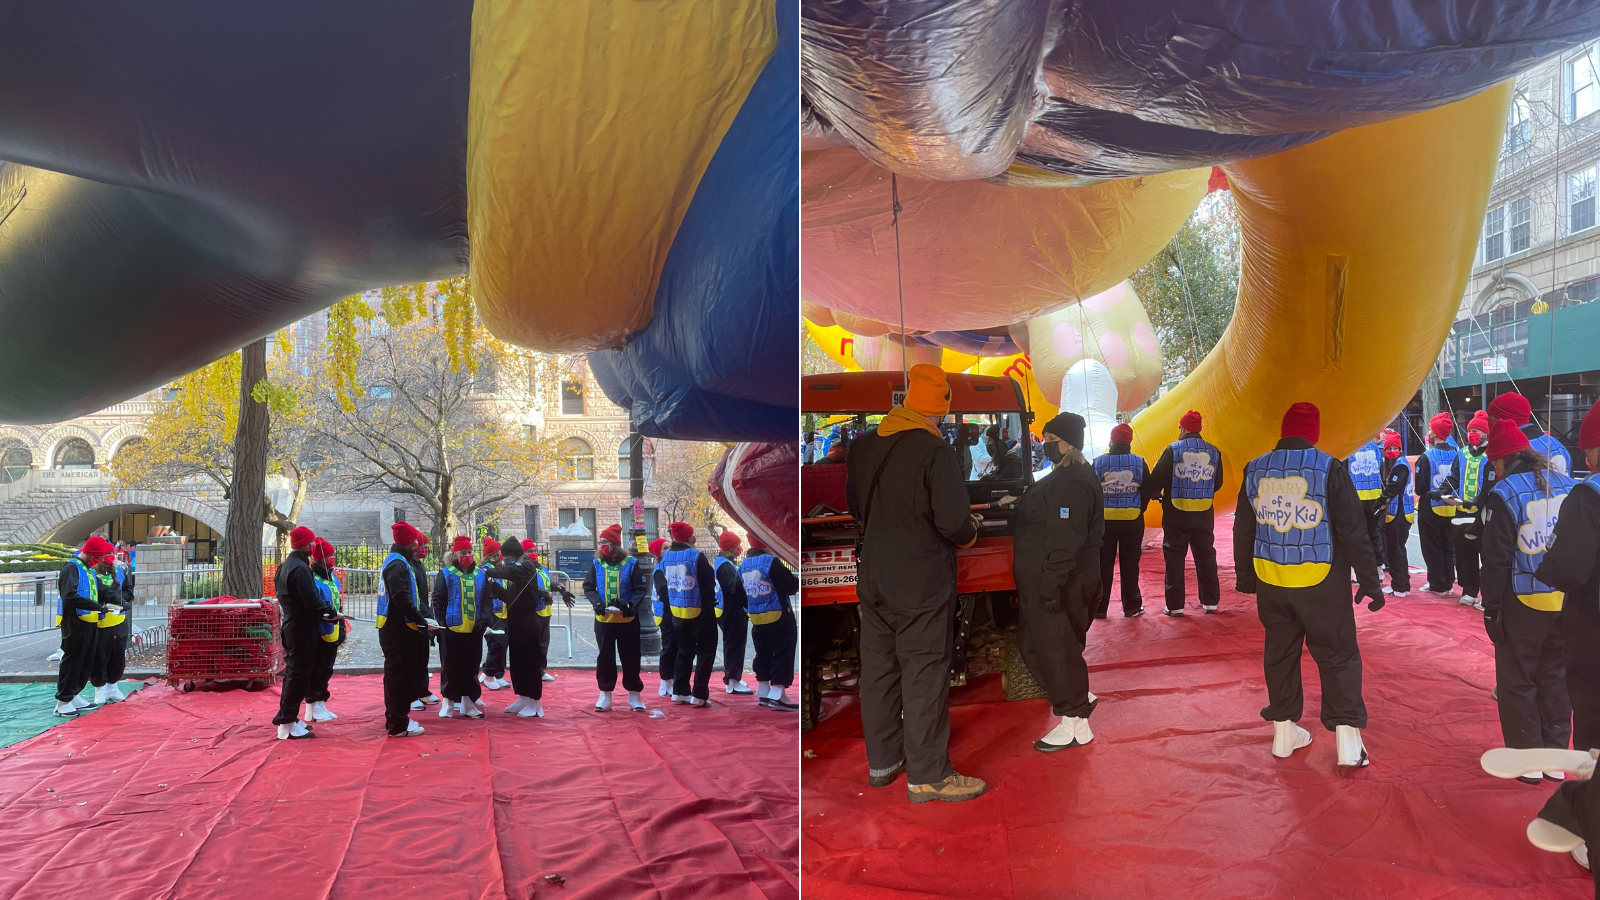 'Join in on the fun': What's it like to hold up a balloon in Macy's Thanksgiving Day Parade?